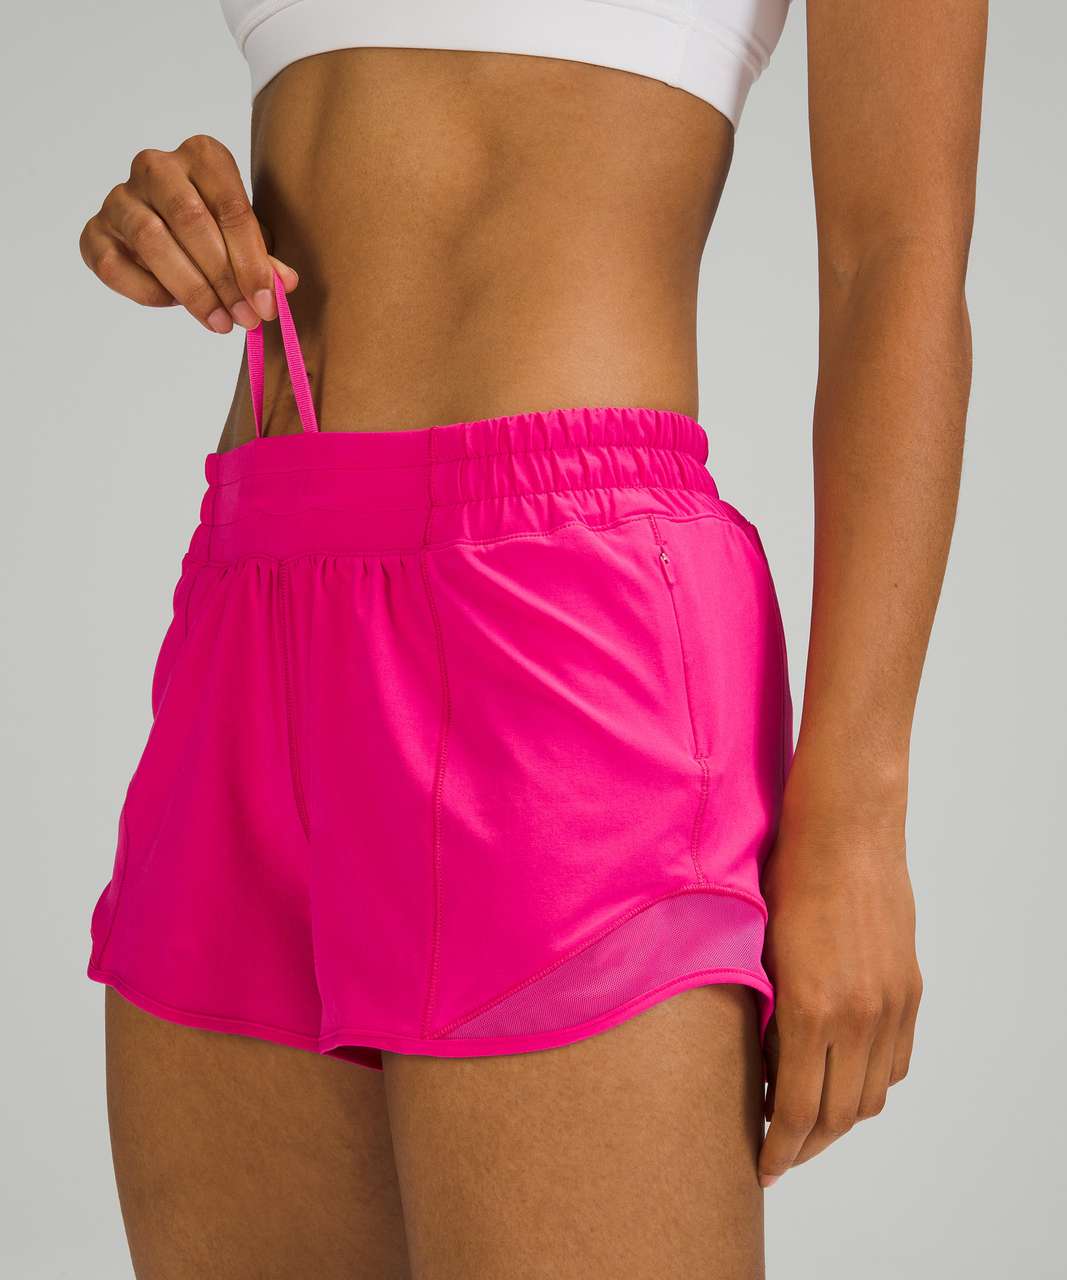 Lululemon Sonic Pink Speed Up Shorts Size 4 - $40 (41% Off Retail) - From  Haley